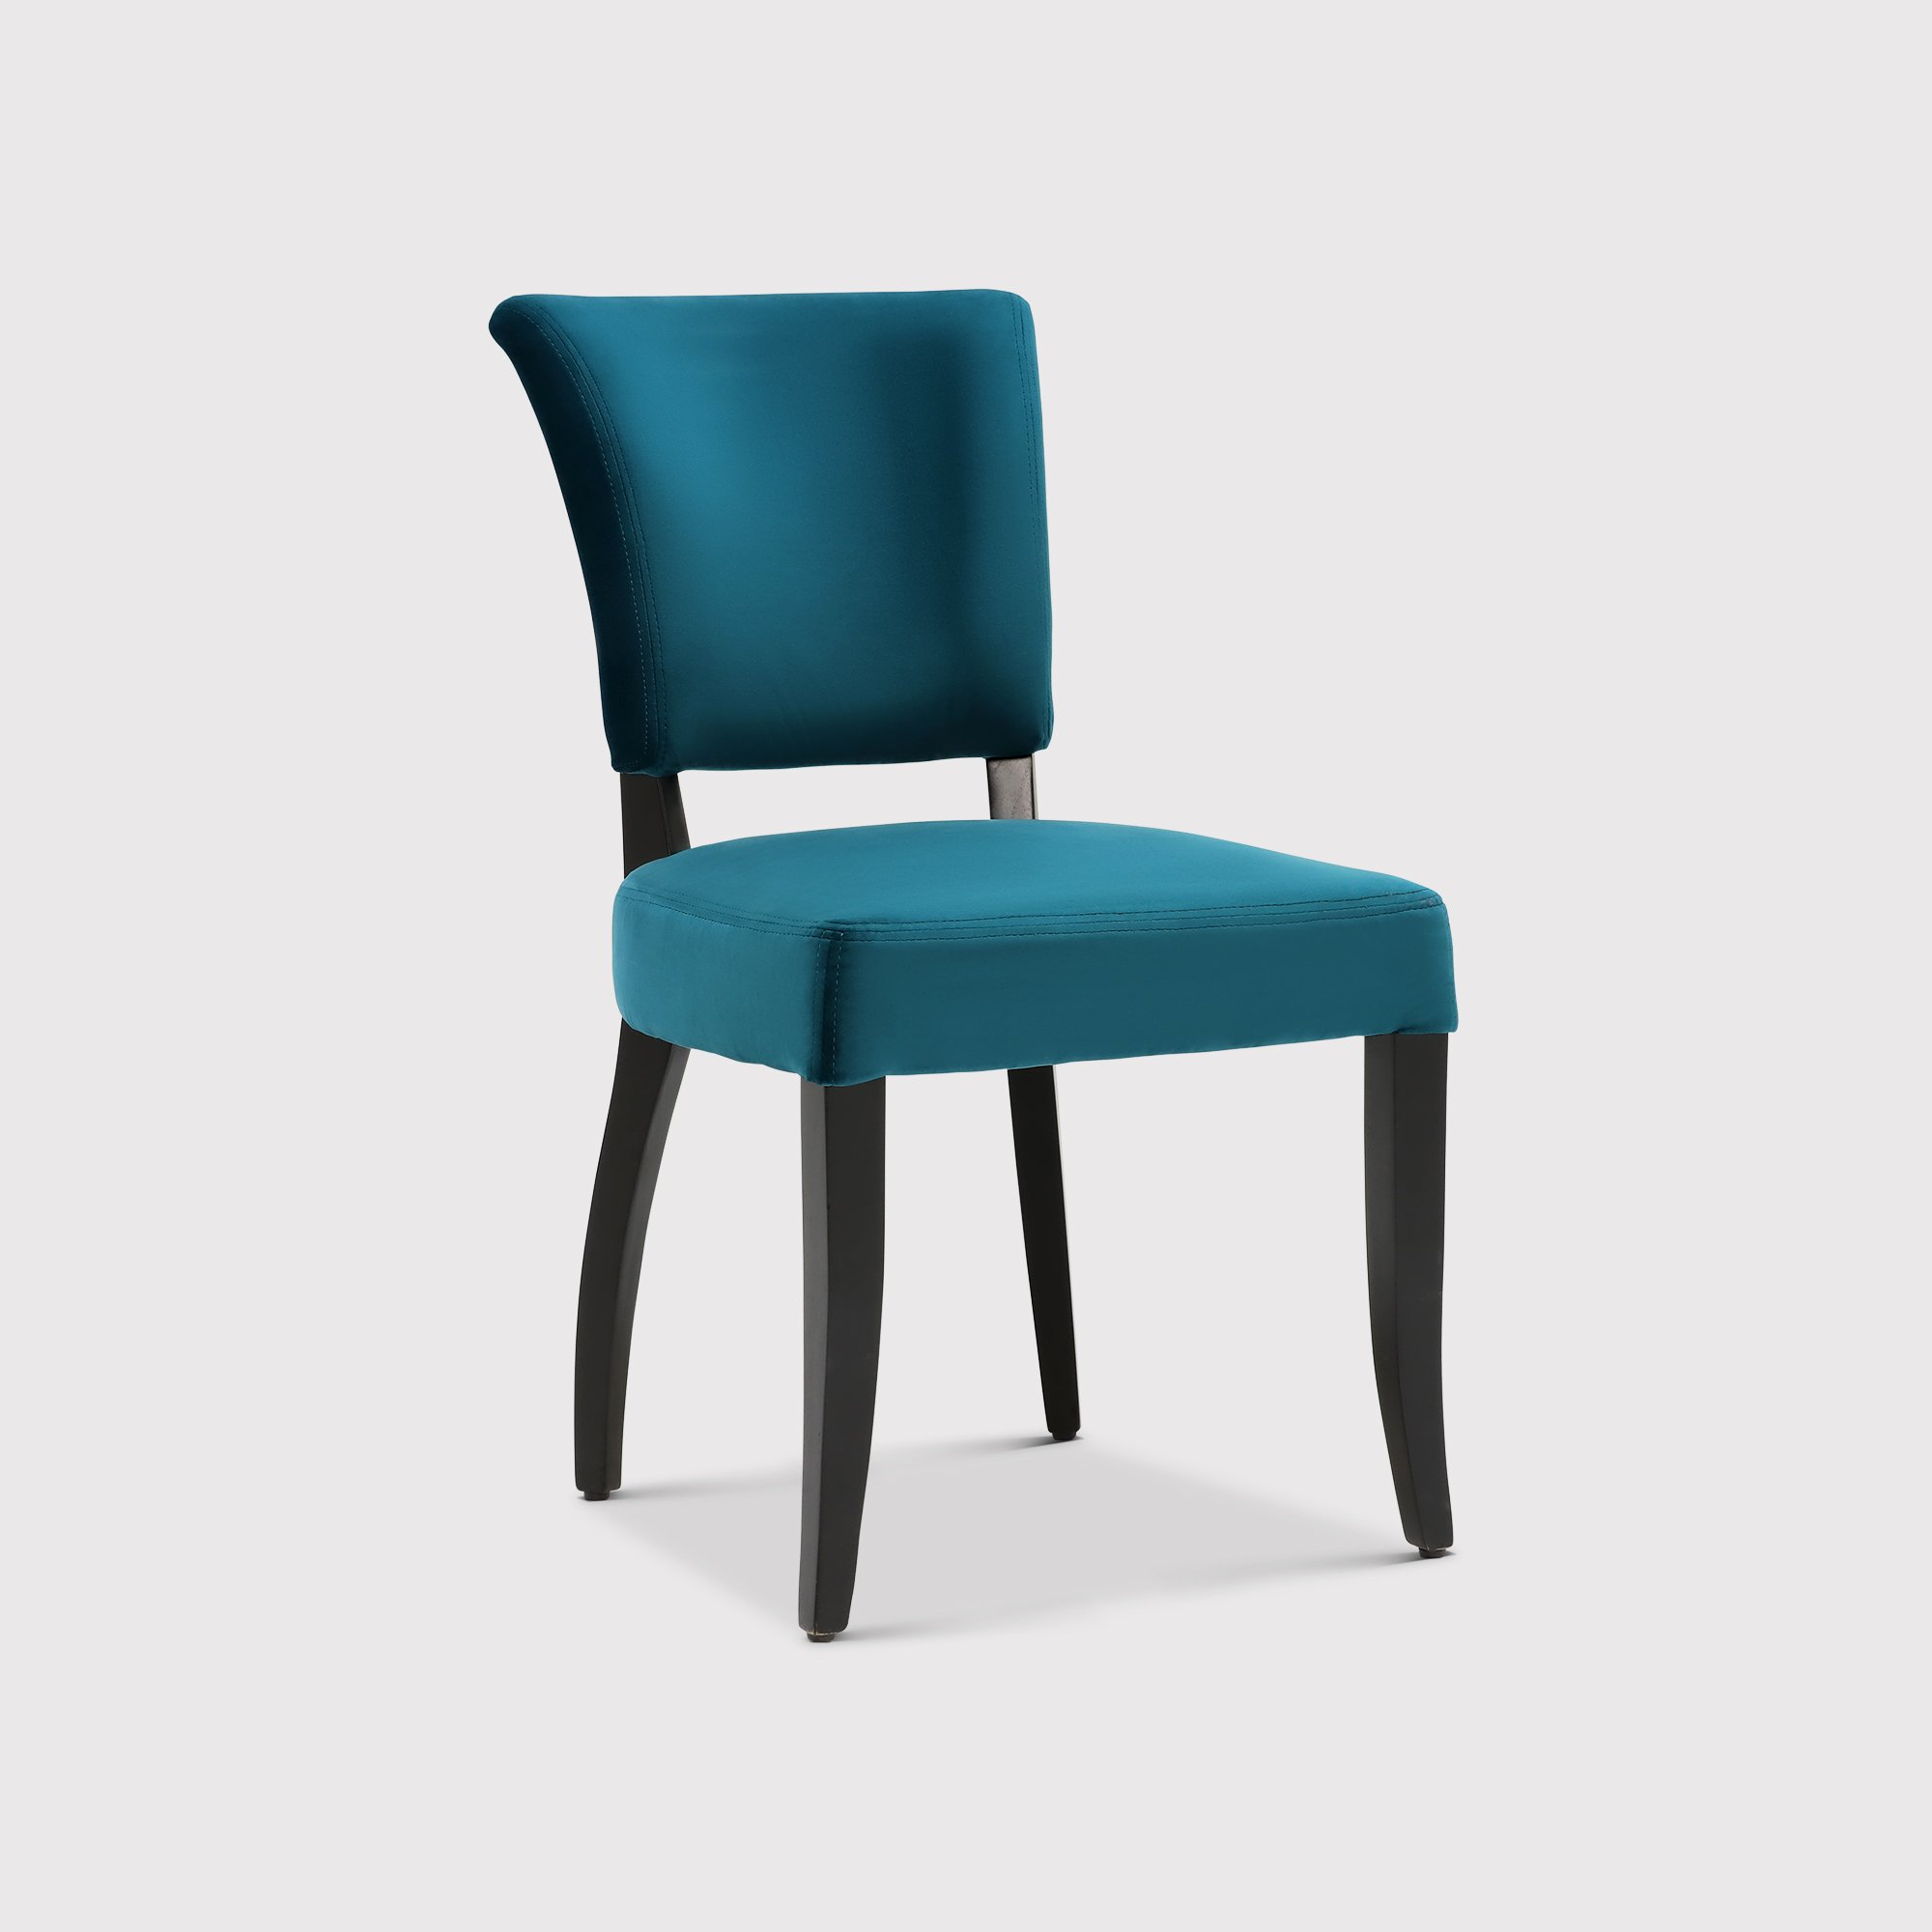 Photo of Timothy oulton mimi dining chair in teal